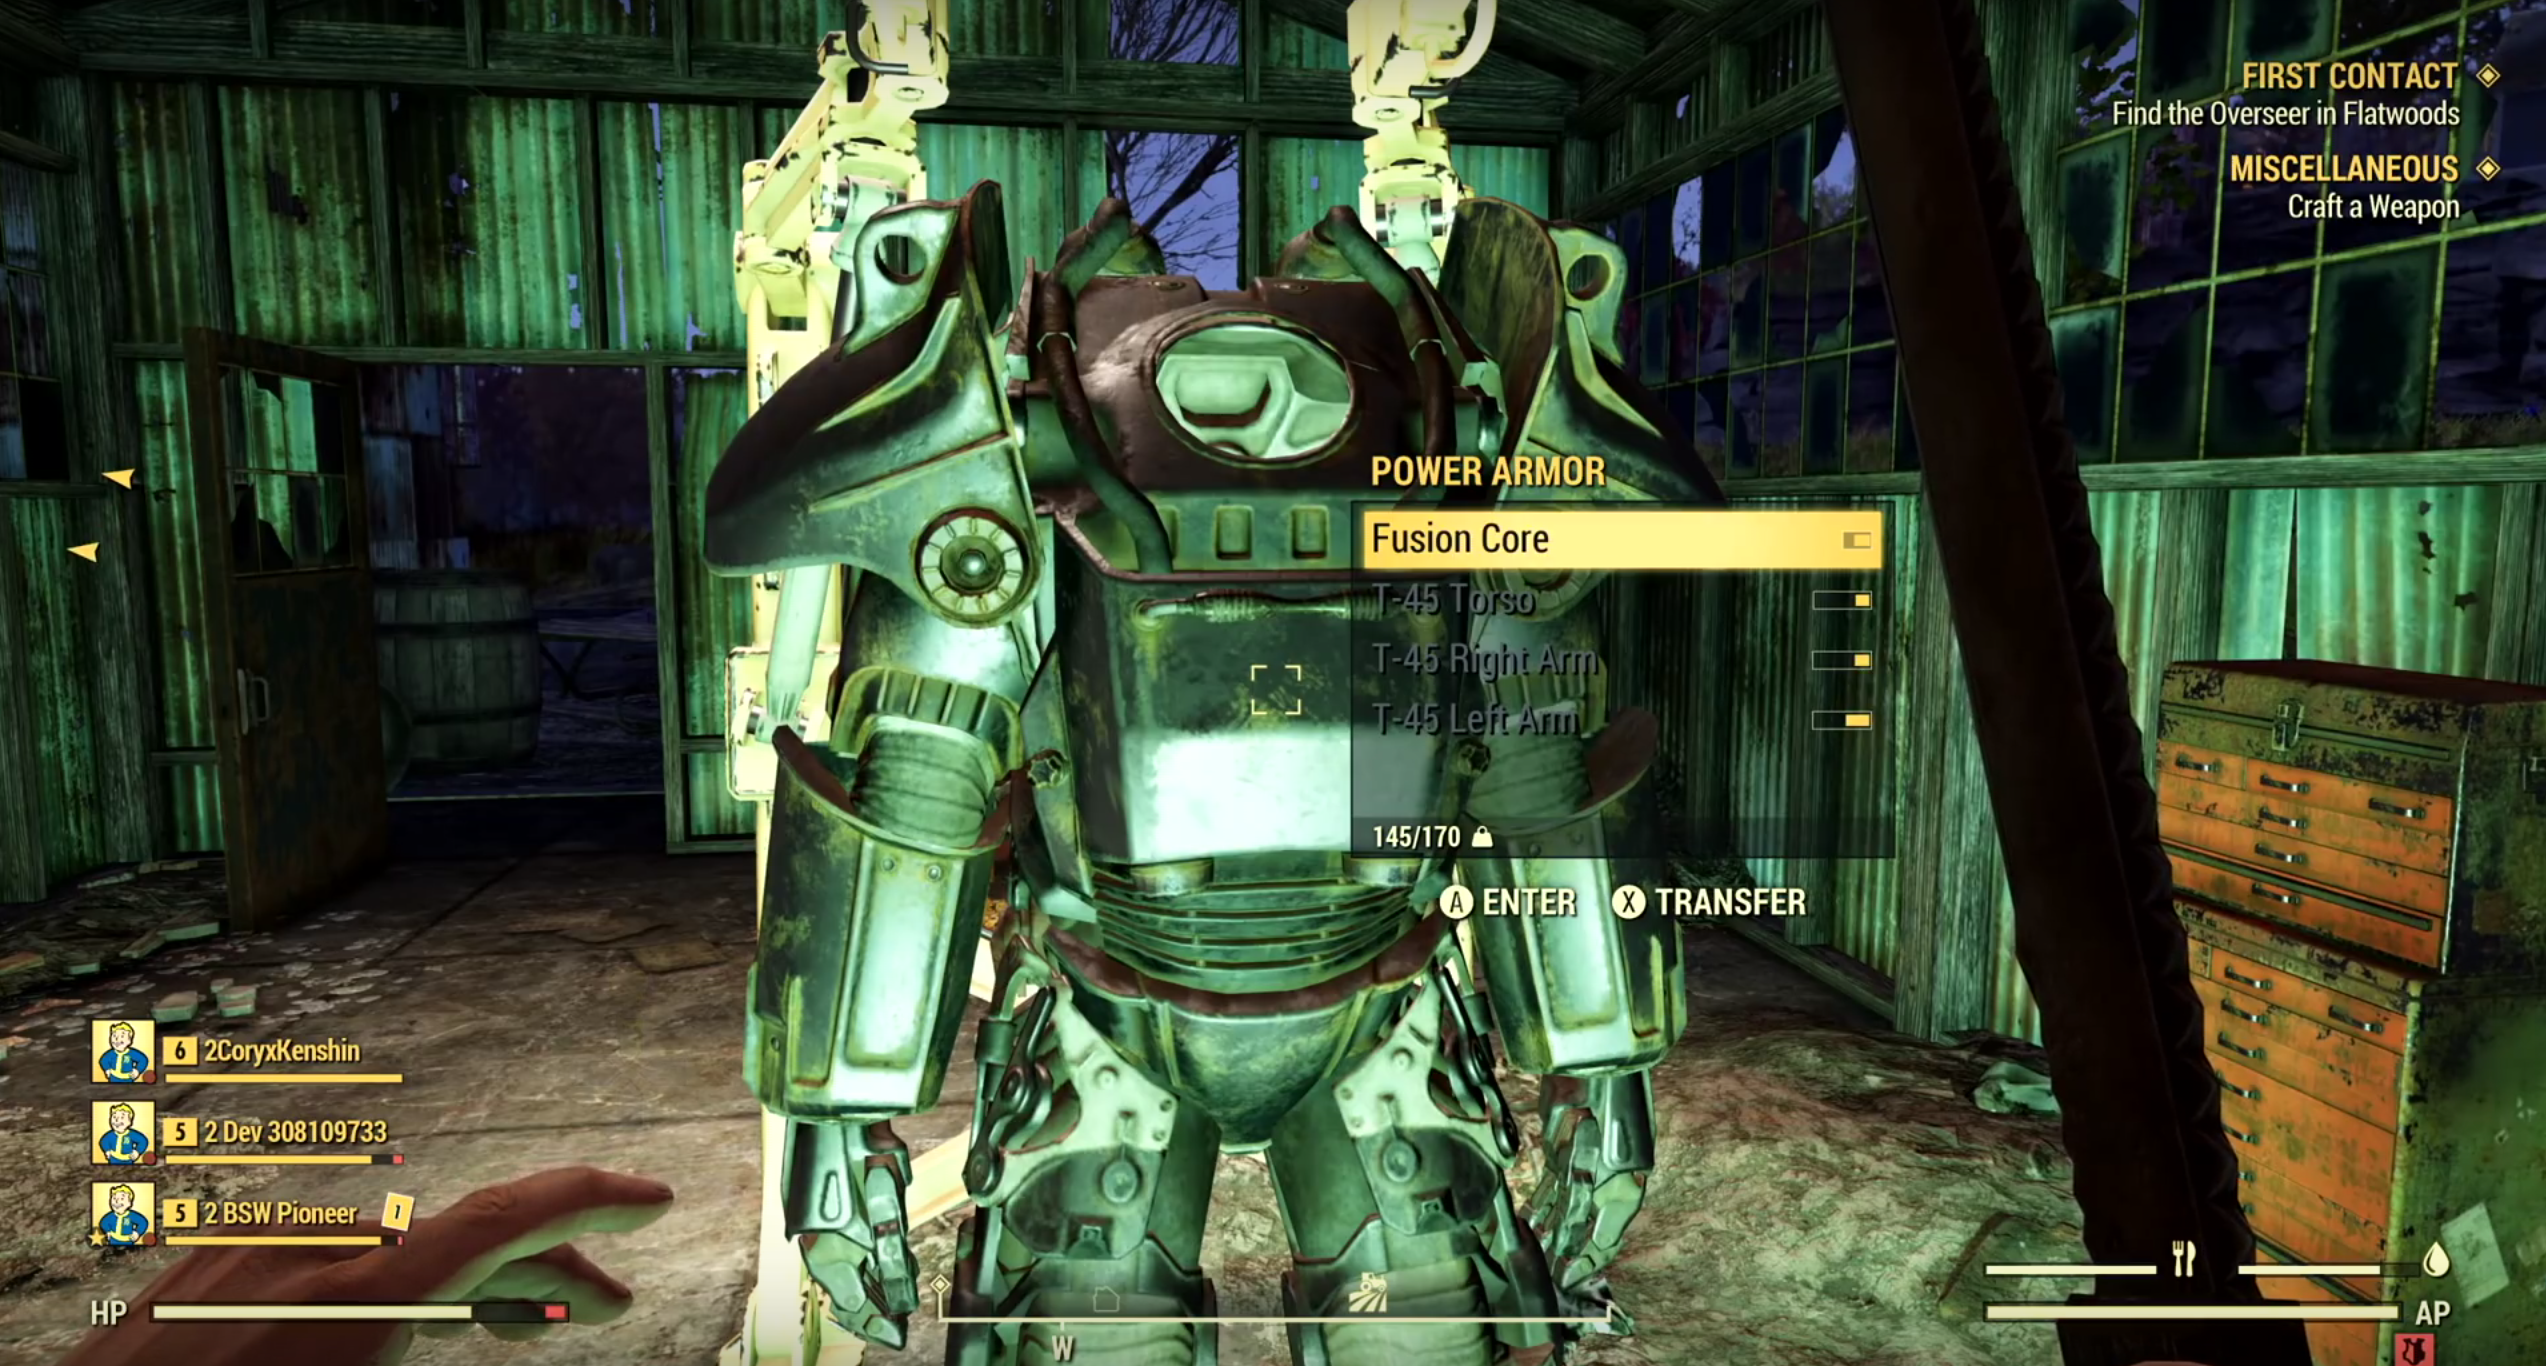 Power Armor Locations and Map – Fallout 76 Guide